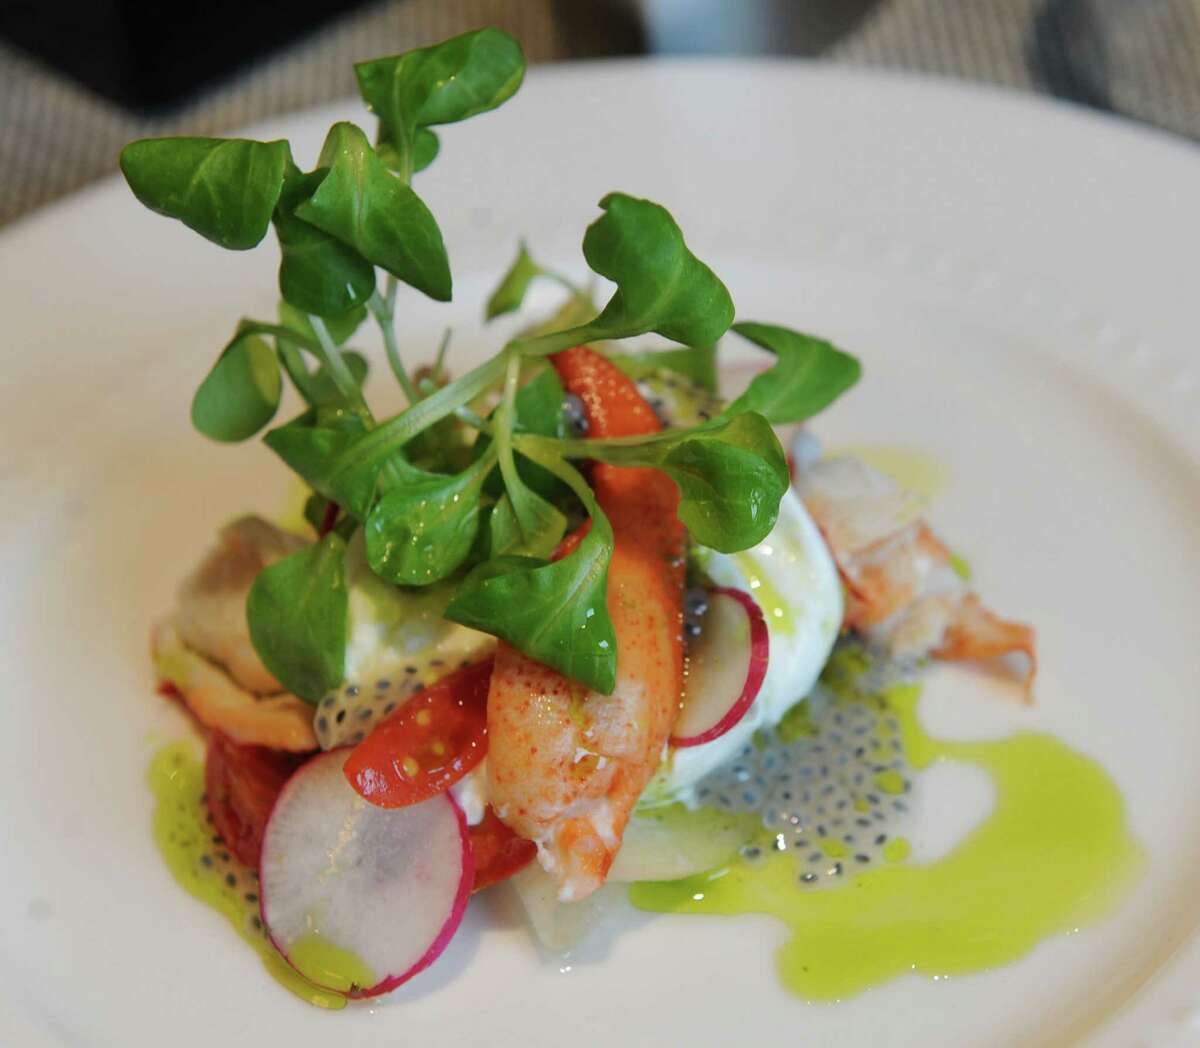 Lobster and burrata, tomato, pickled pear, radish, and basil oil is under starters on the menu at Tala American Bistro on Thursday, June 13, 2013 in Latham, N.Y. (Lori Van Buren / Times Union)